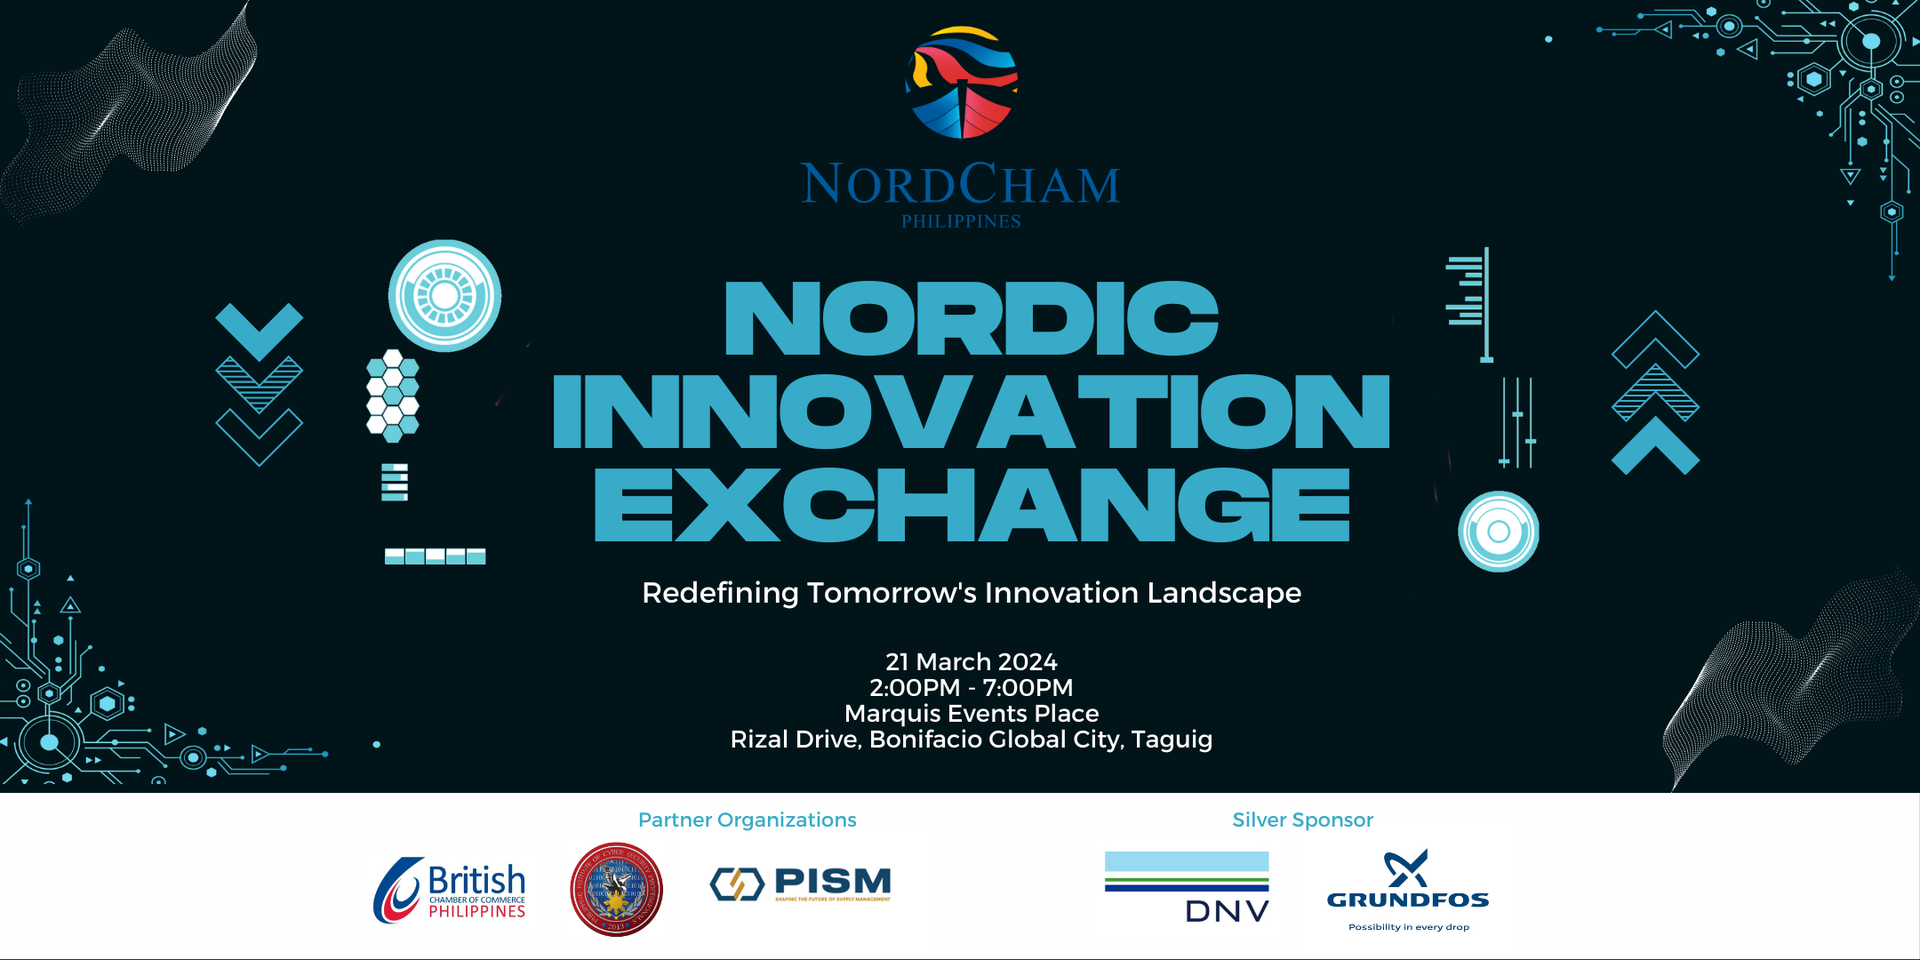 thumbnails NORDIC INNOVATION EXCHANGE | 21 MARCH 2024 | MARQUIS EVENTS PLACE